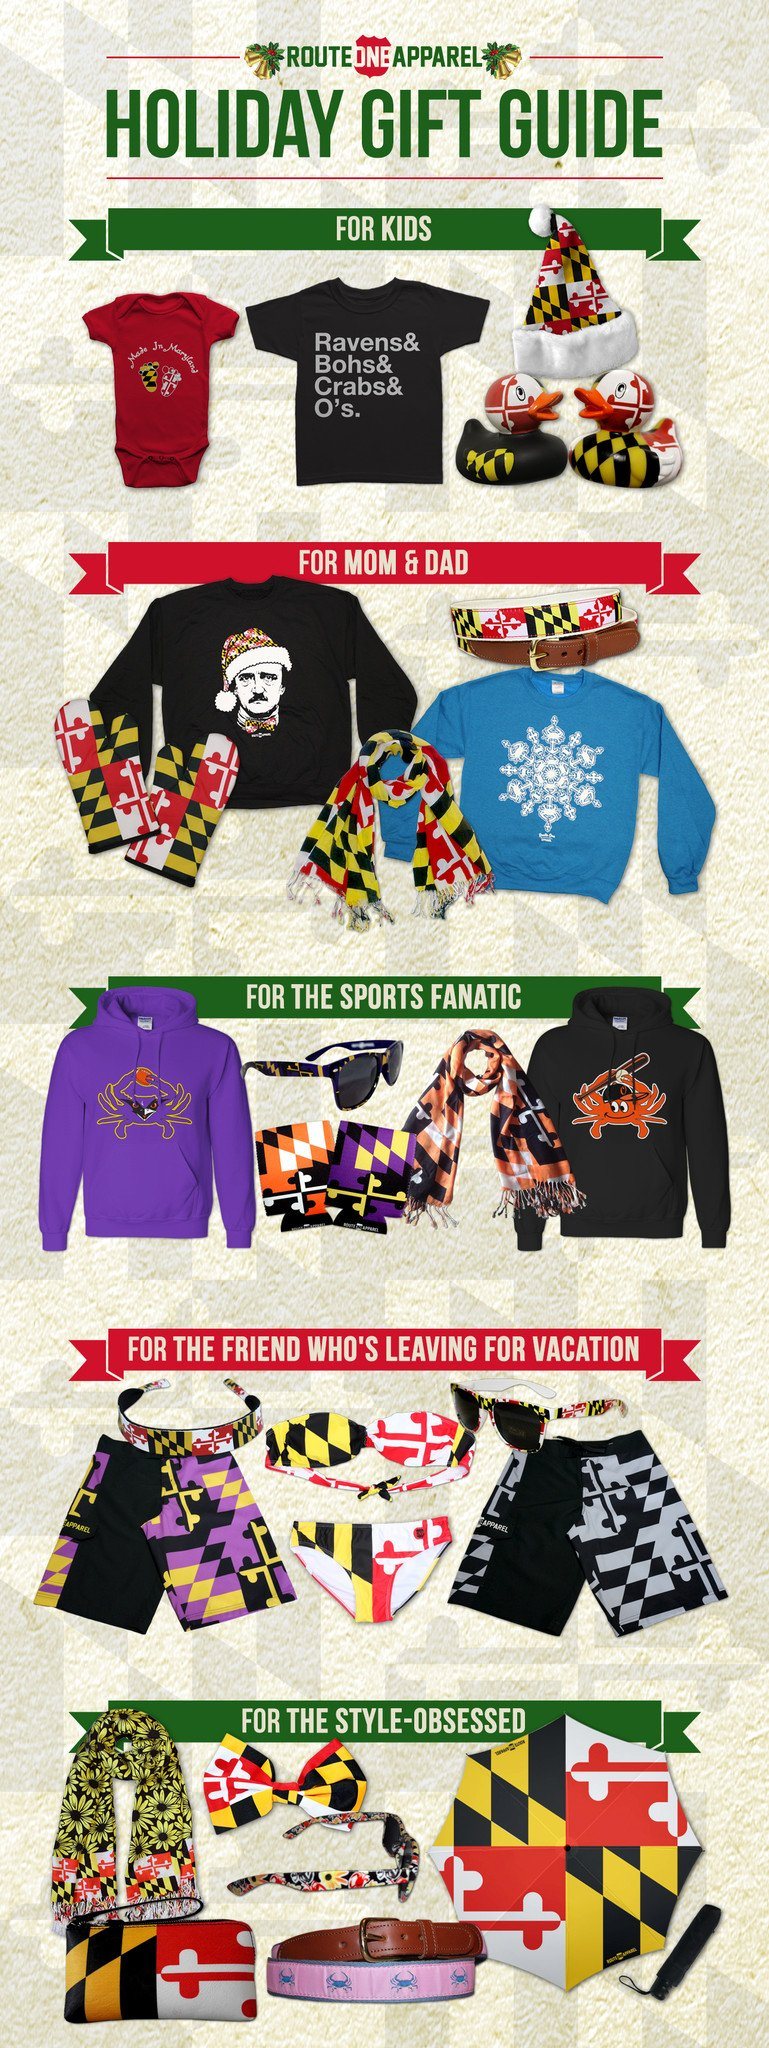 Route One Apparel Holiday Gift Guide